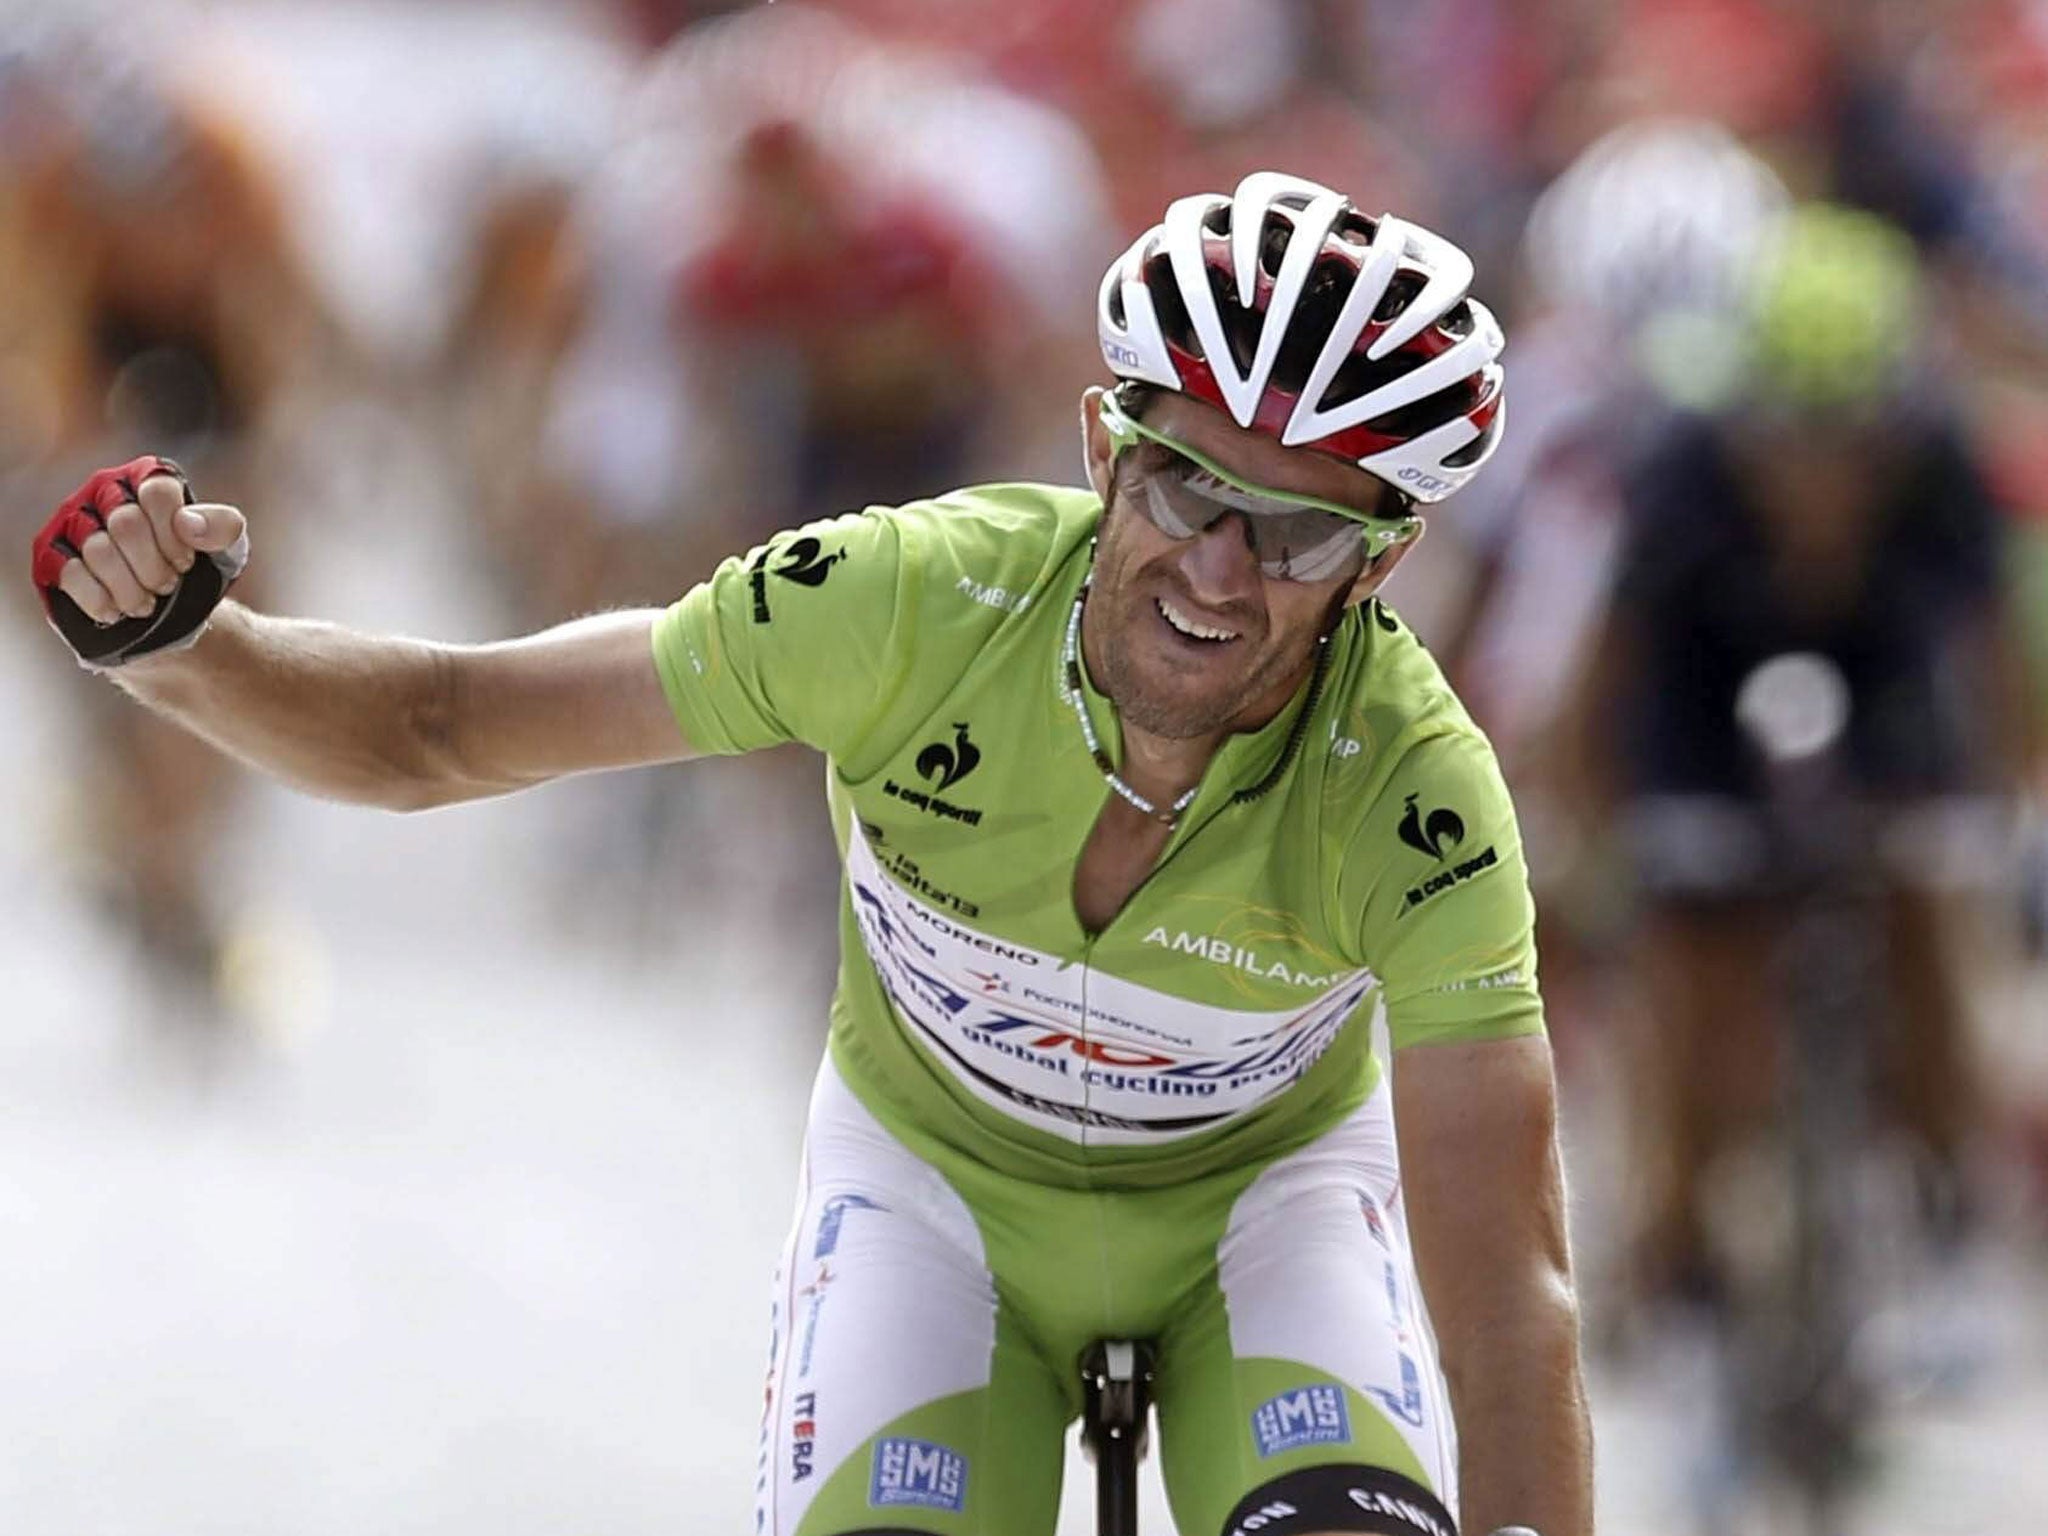 Daniel Moreno has taken the lead of the Spanish Vuelta by one second